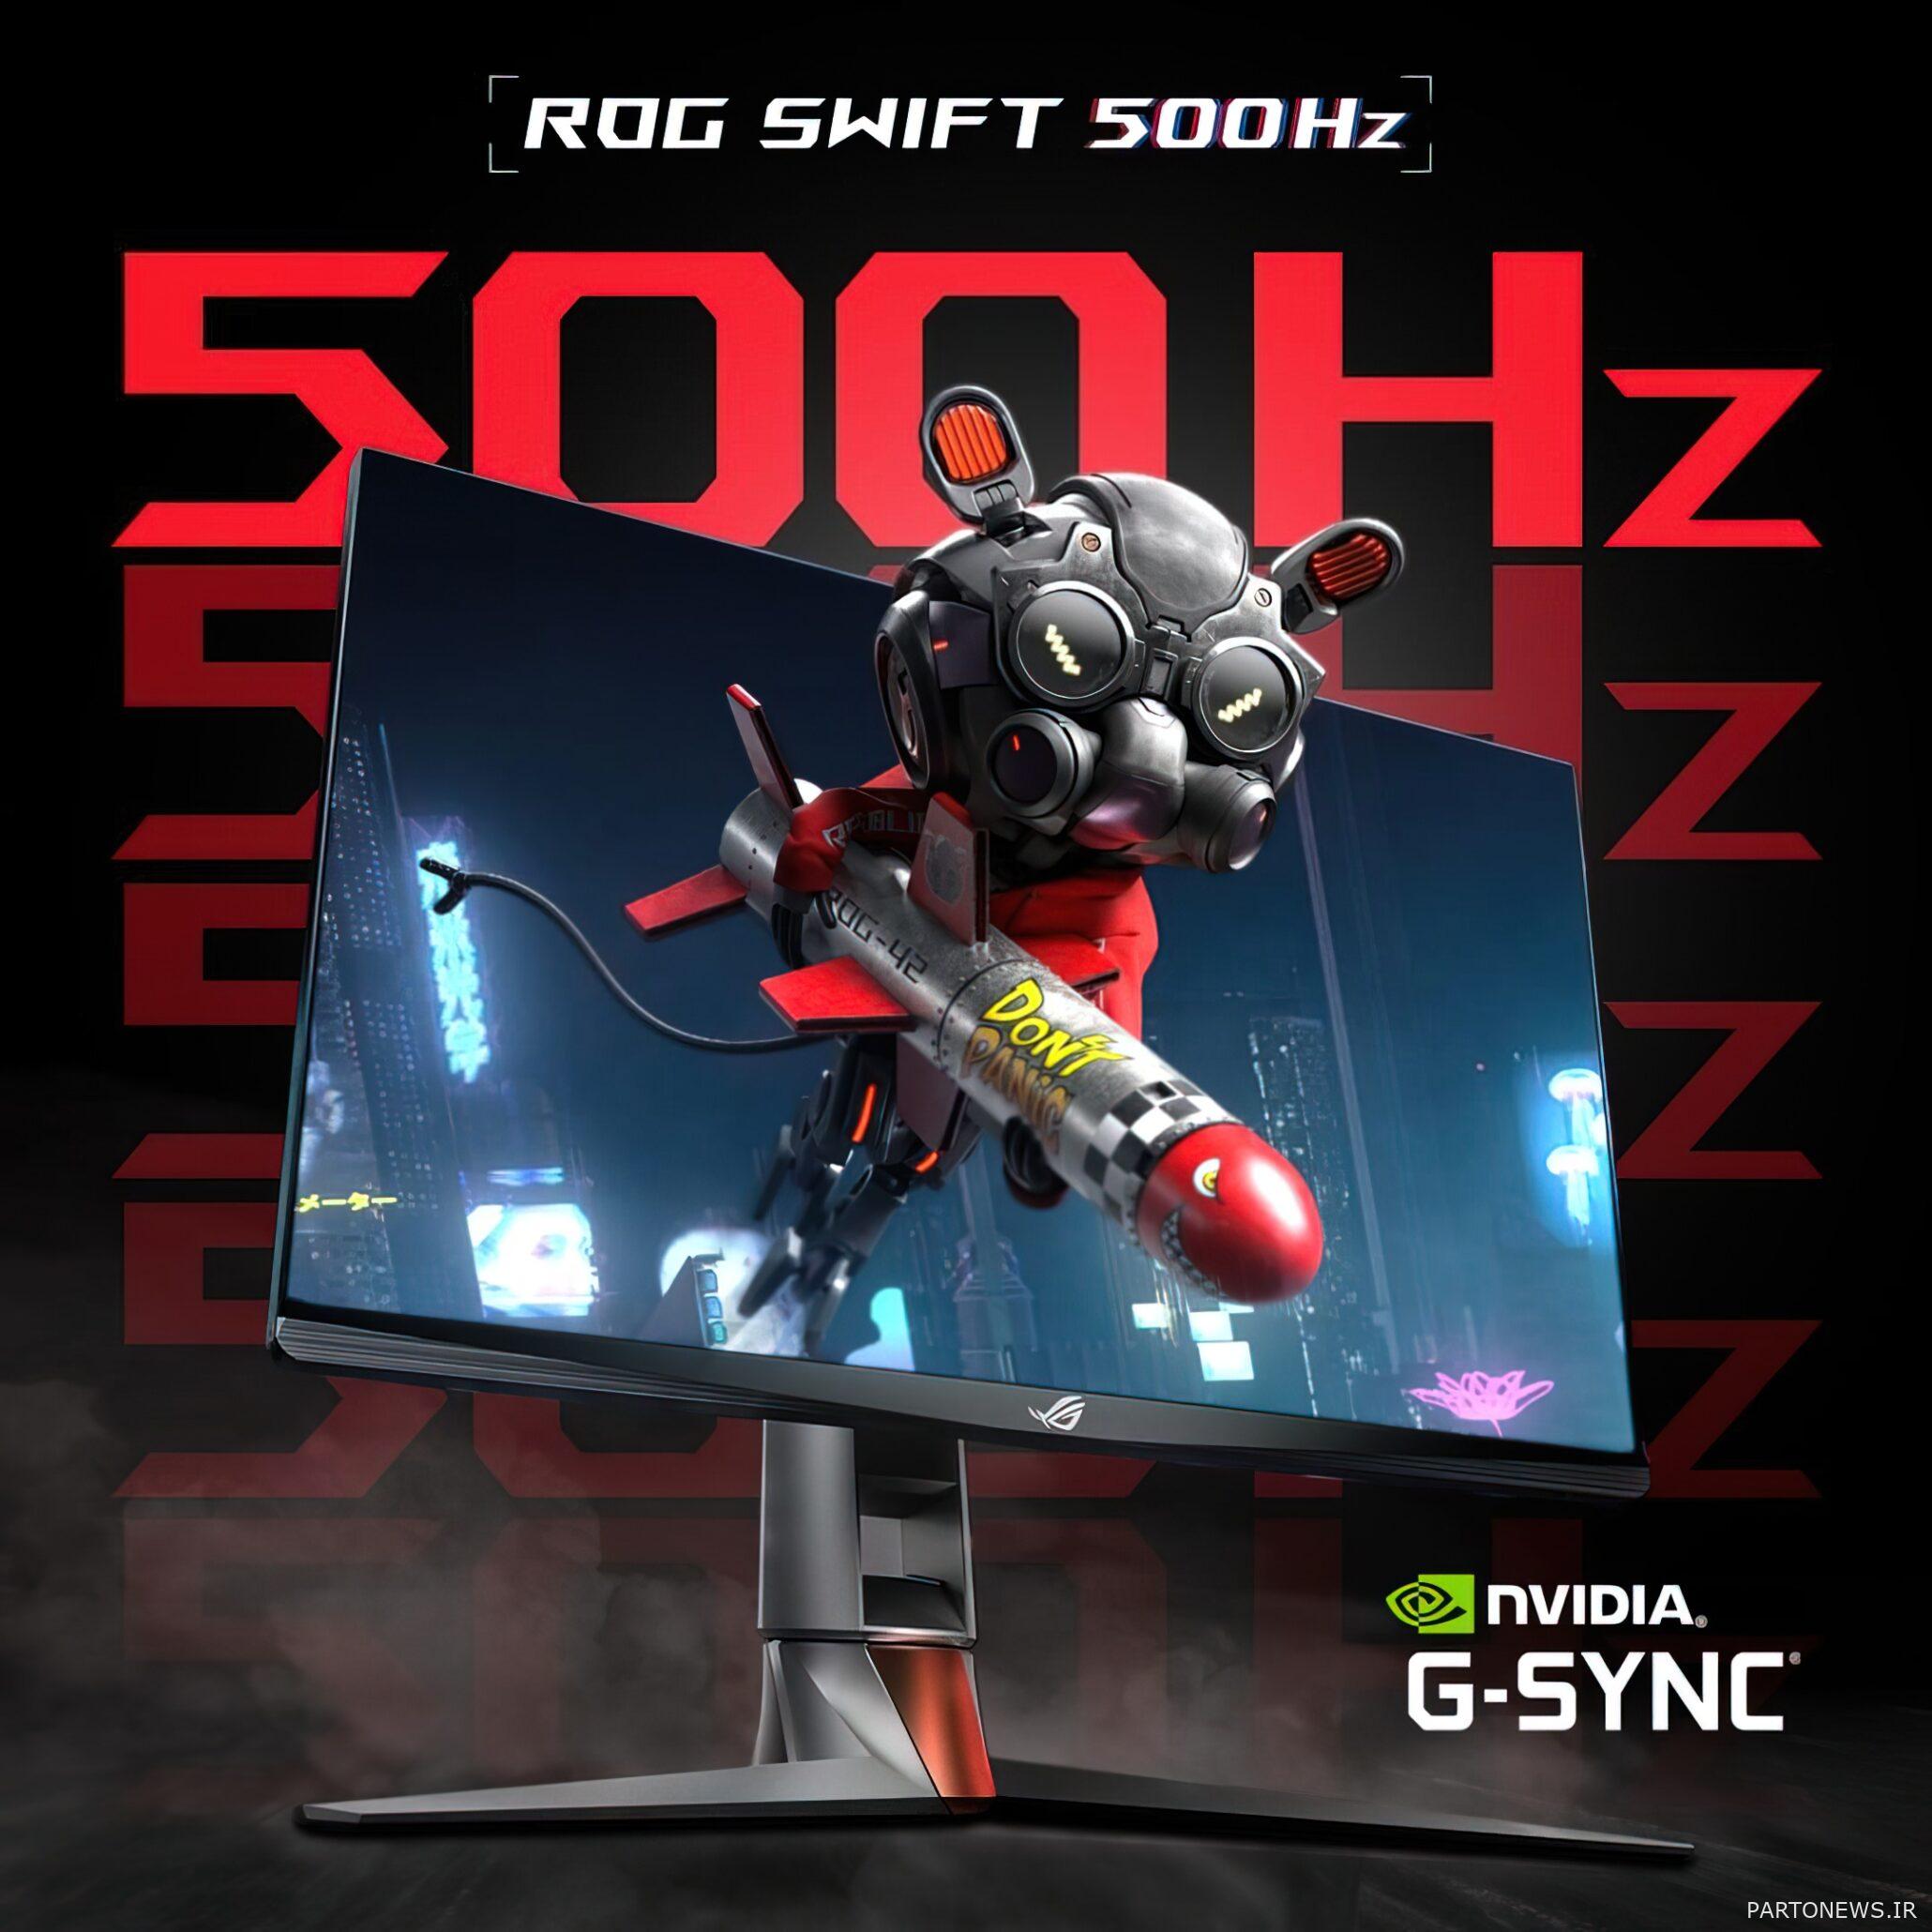 Asus 500 Hz monitor introduced.